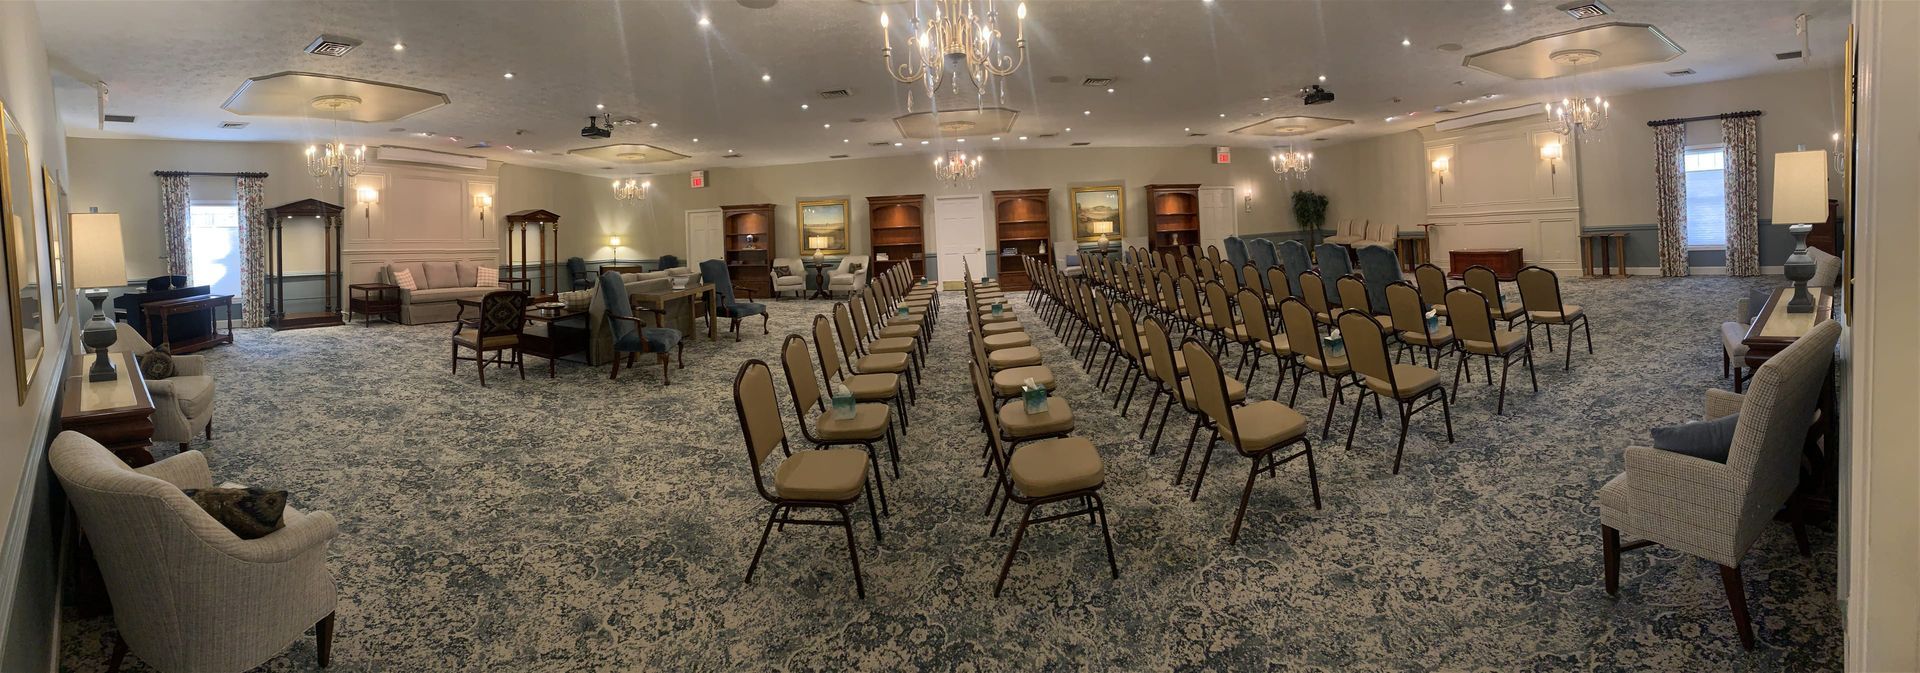 a large room filled with chairs and a chandelier .